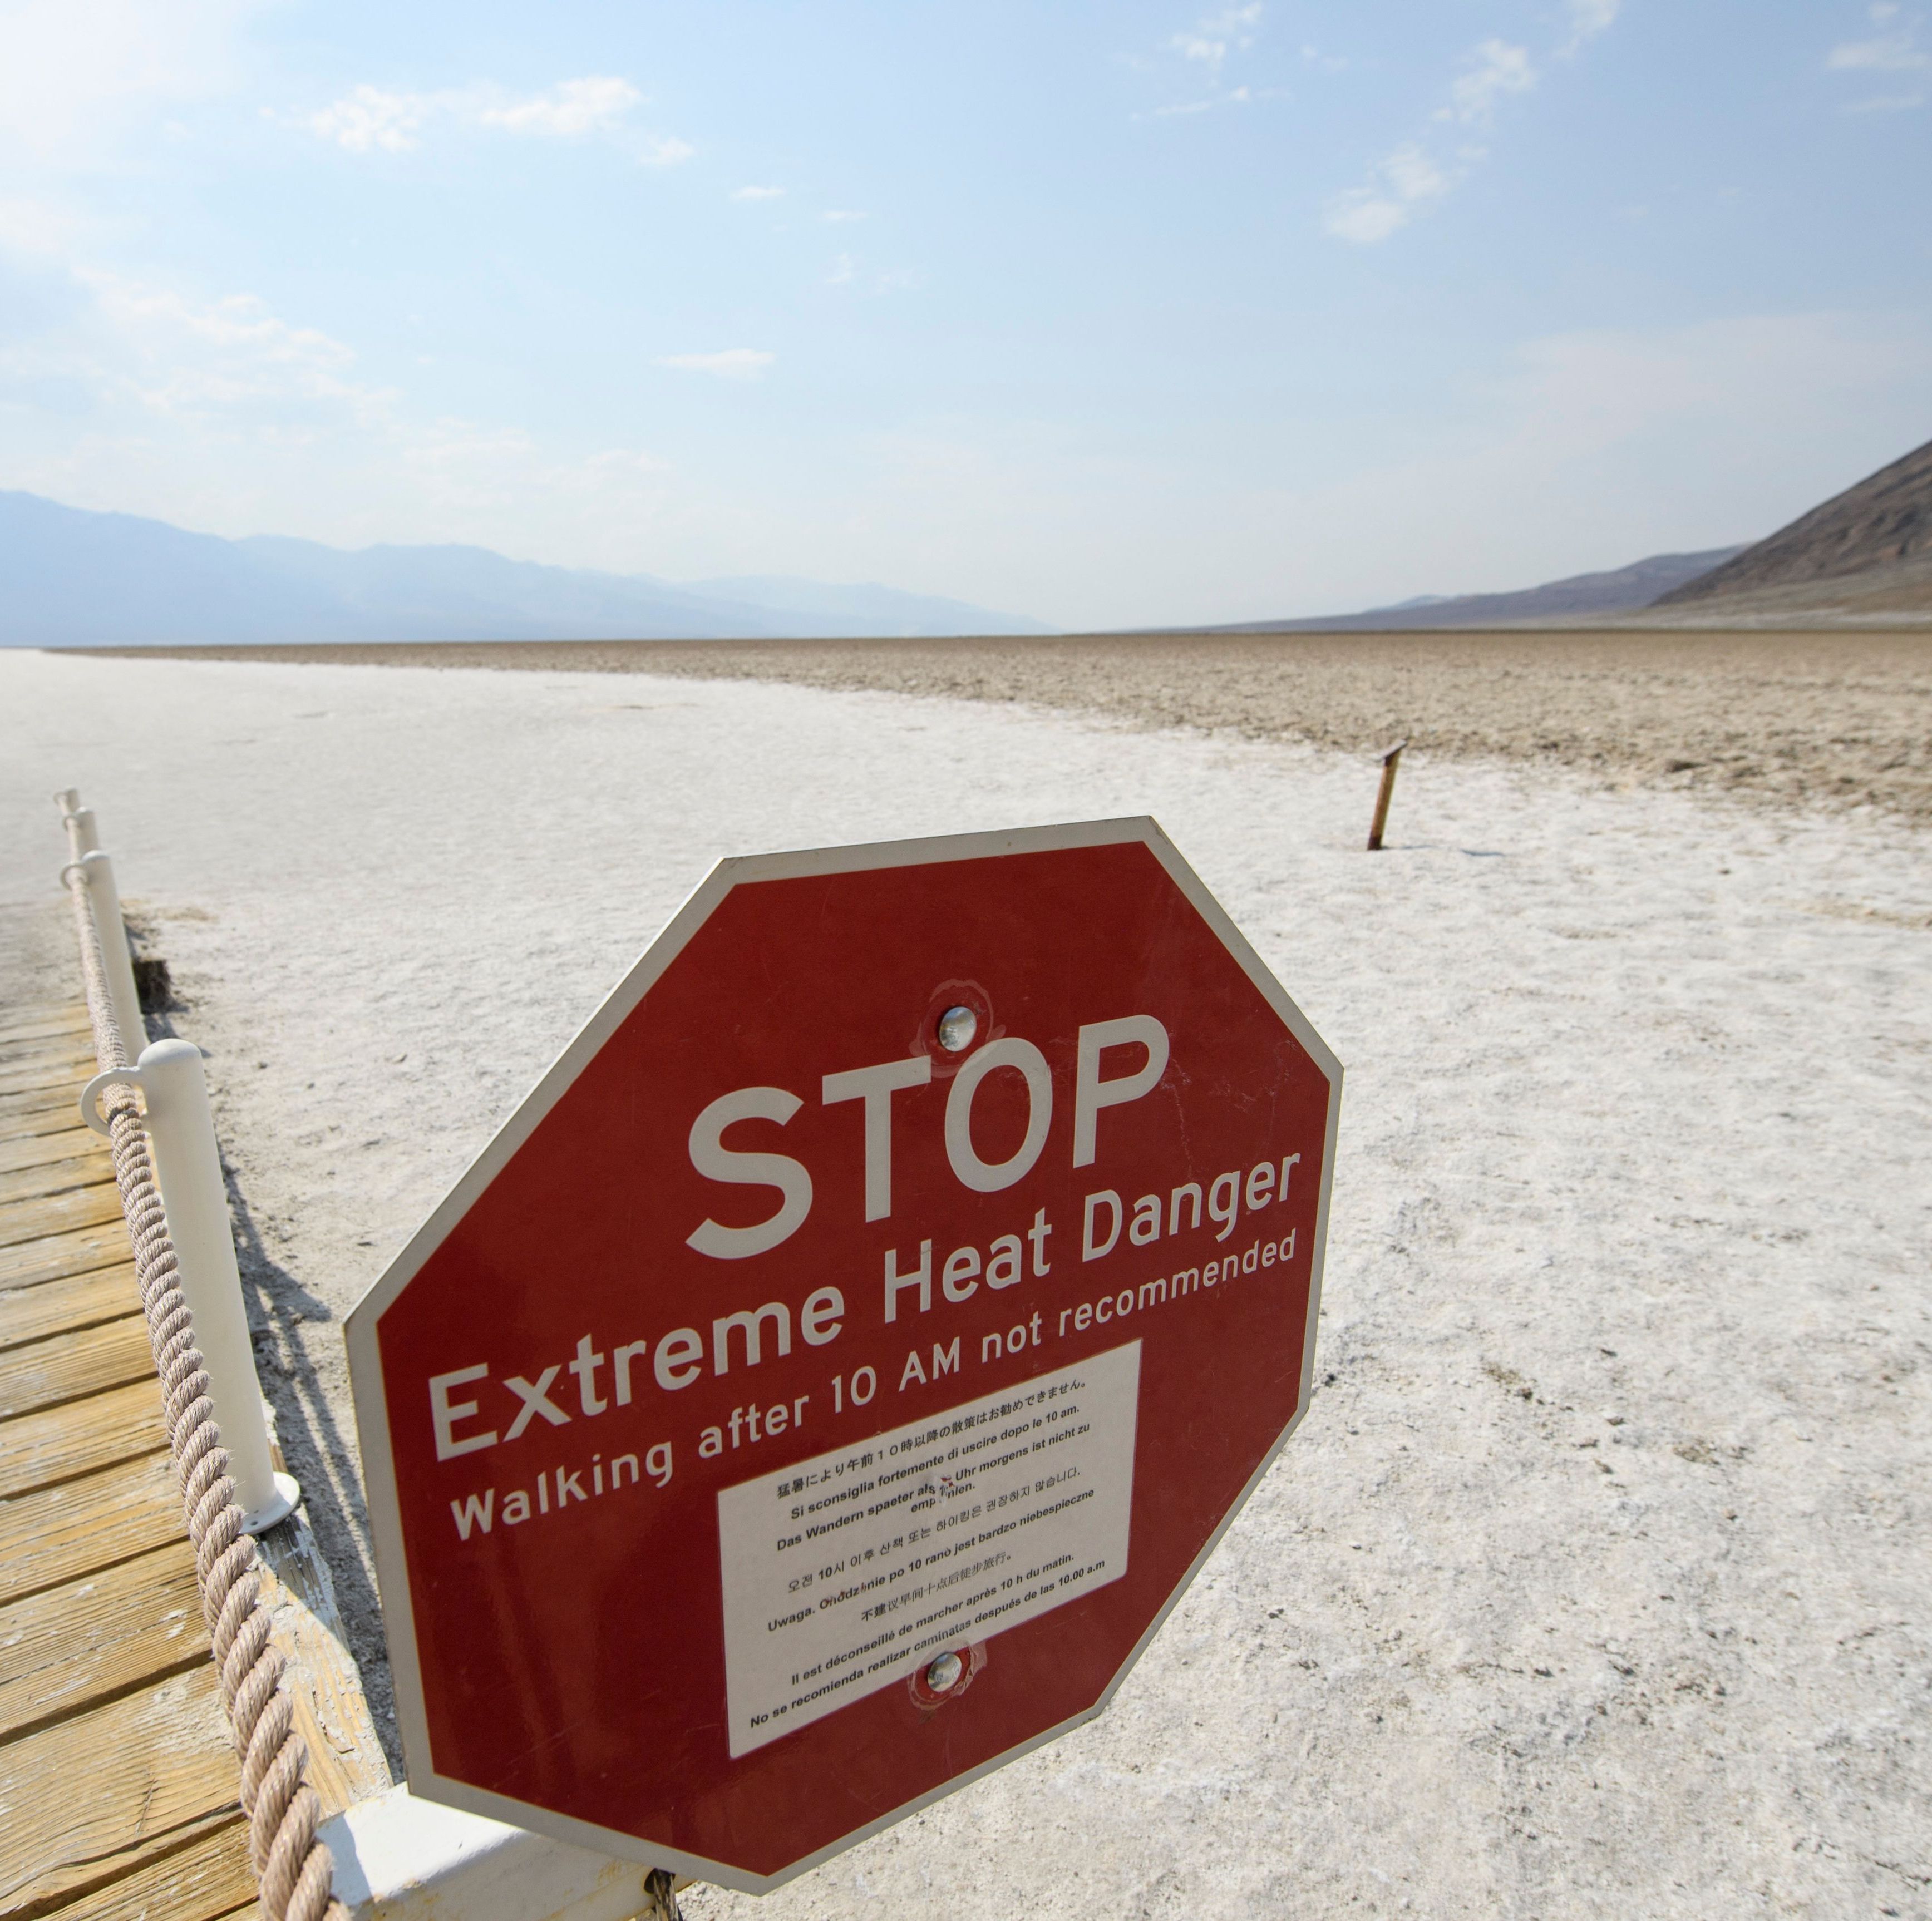 Death Valley Is the Hottest Place on Earth, But There's a Bit More to the Story